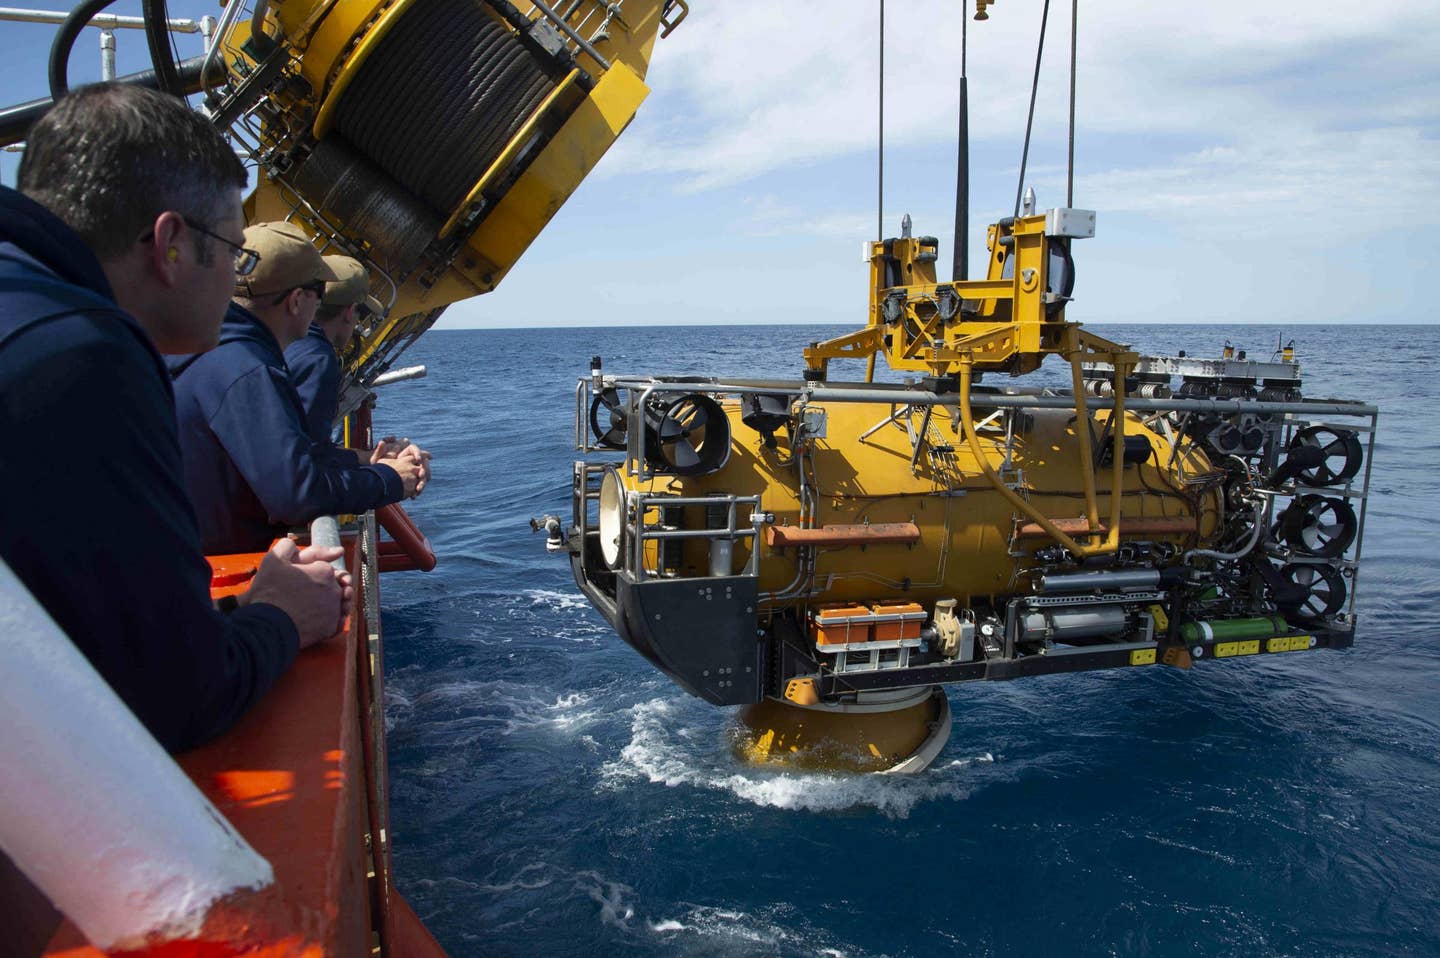 Sailors assigned to the Navy’s Undersea Rescue Command observe as the U.S. Navy Pressurized Rescue Module (PRM) system deploys from the Royal Malaysian Submarine Rescue Ship, MV <em>Mega Bakti</em>, during Exercise Pacific Reach (PACREACH) in 2019. <em>U.S. Navy/Thomas Gooley</em>